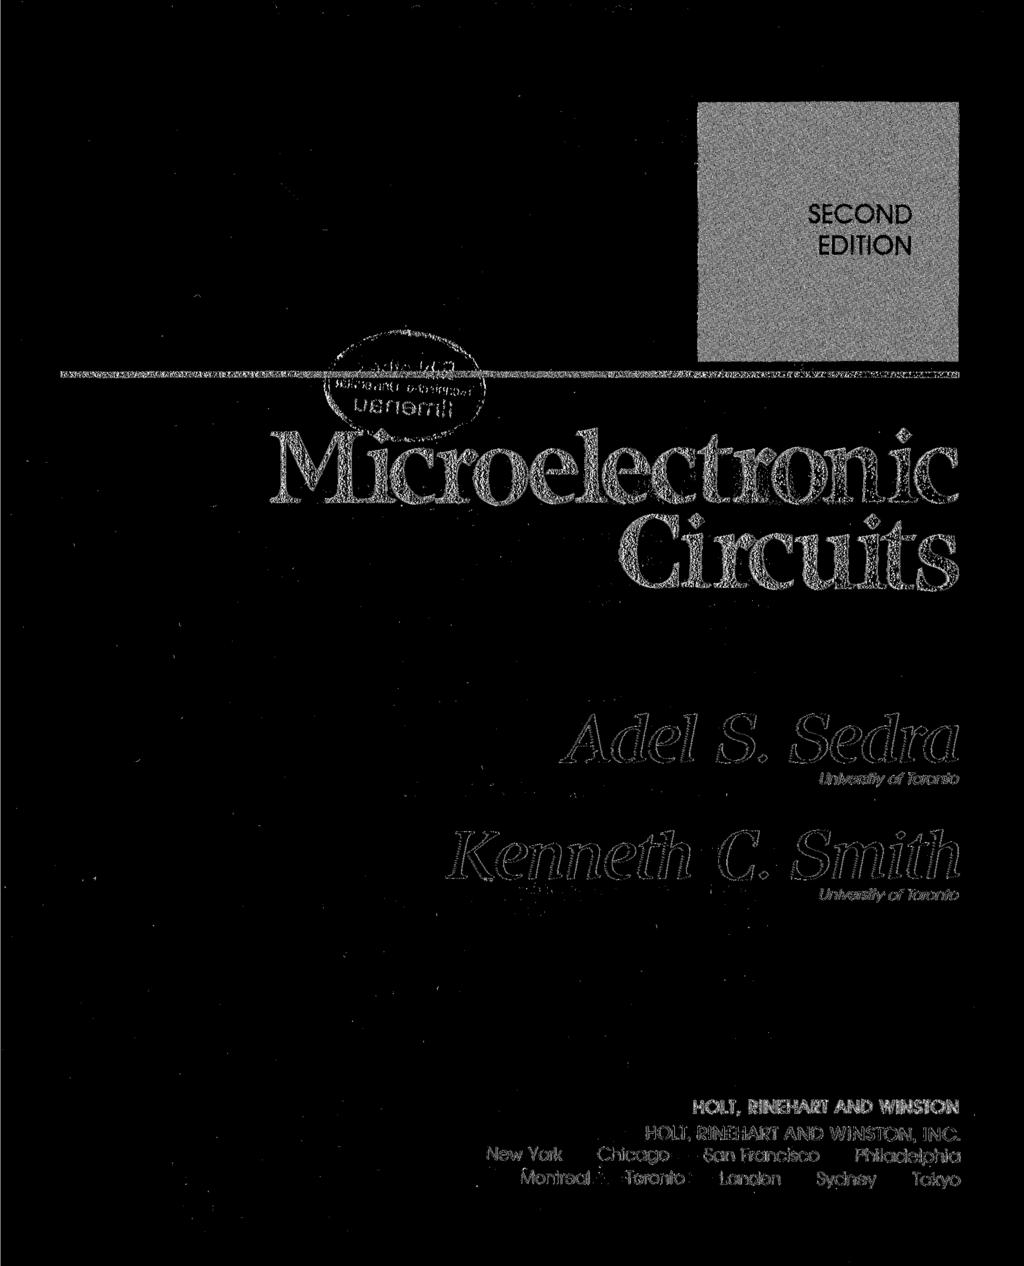 SECOND EDITION ISHBWHBI \ ' -' Microelectronic Circuits Adel S.